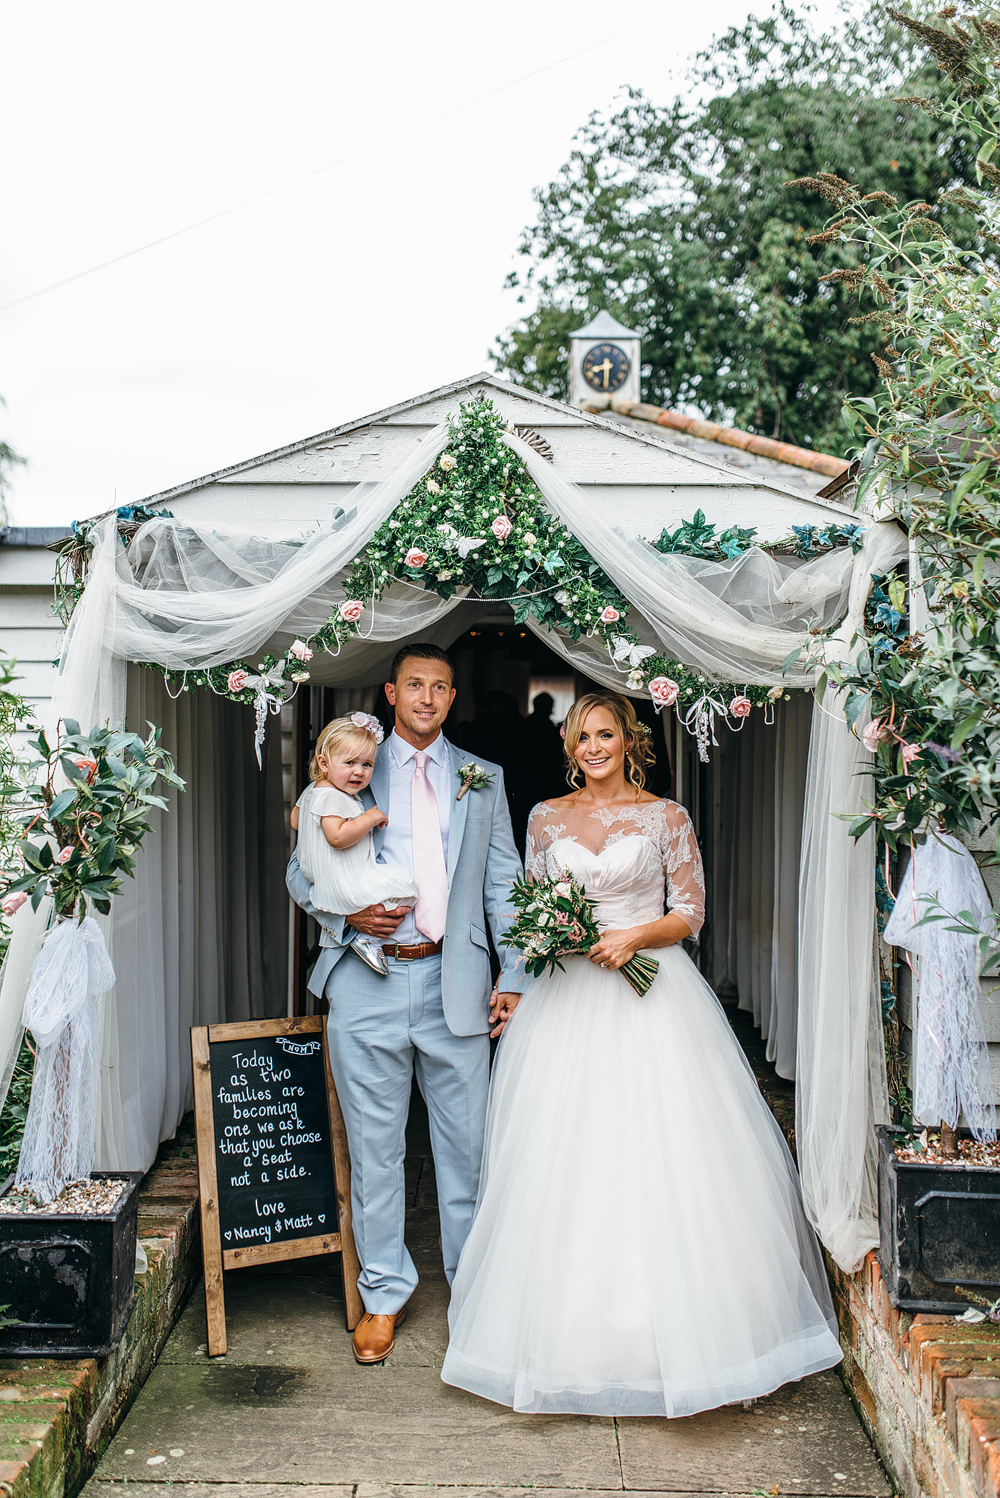 Bride and groom with child standing under canopy